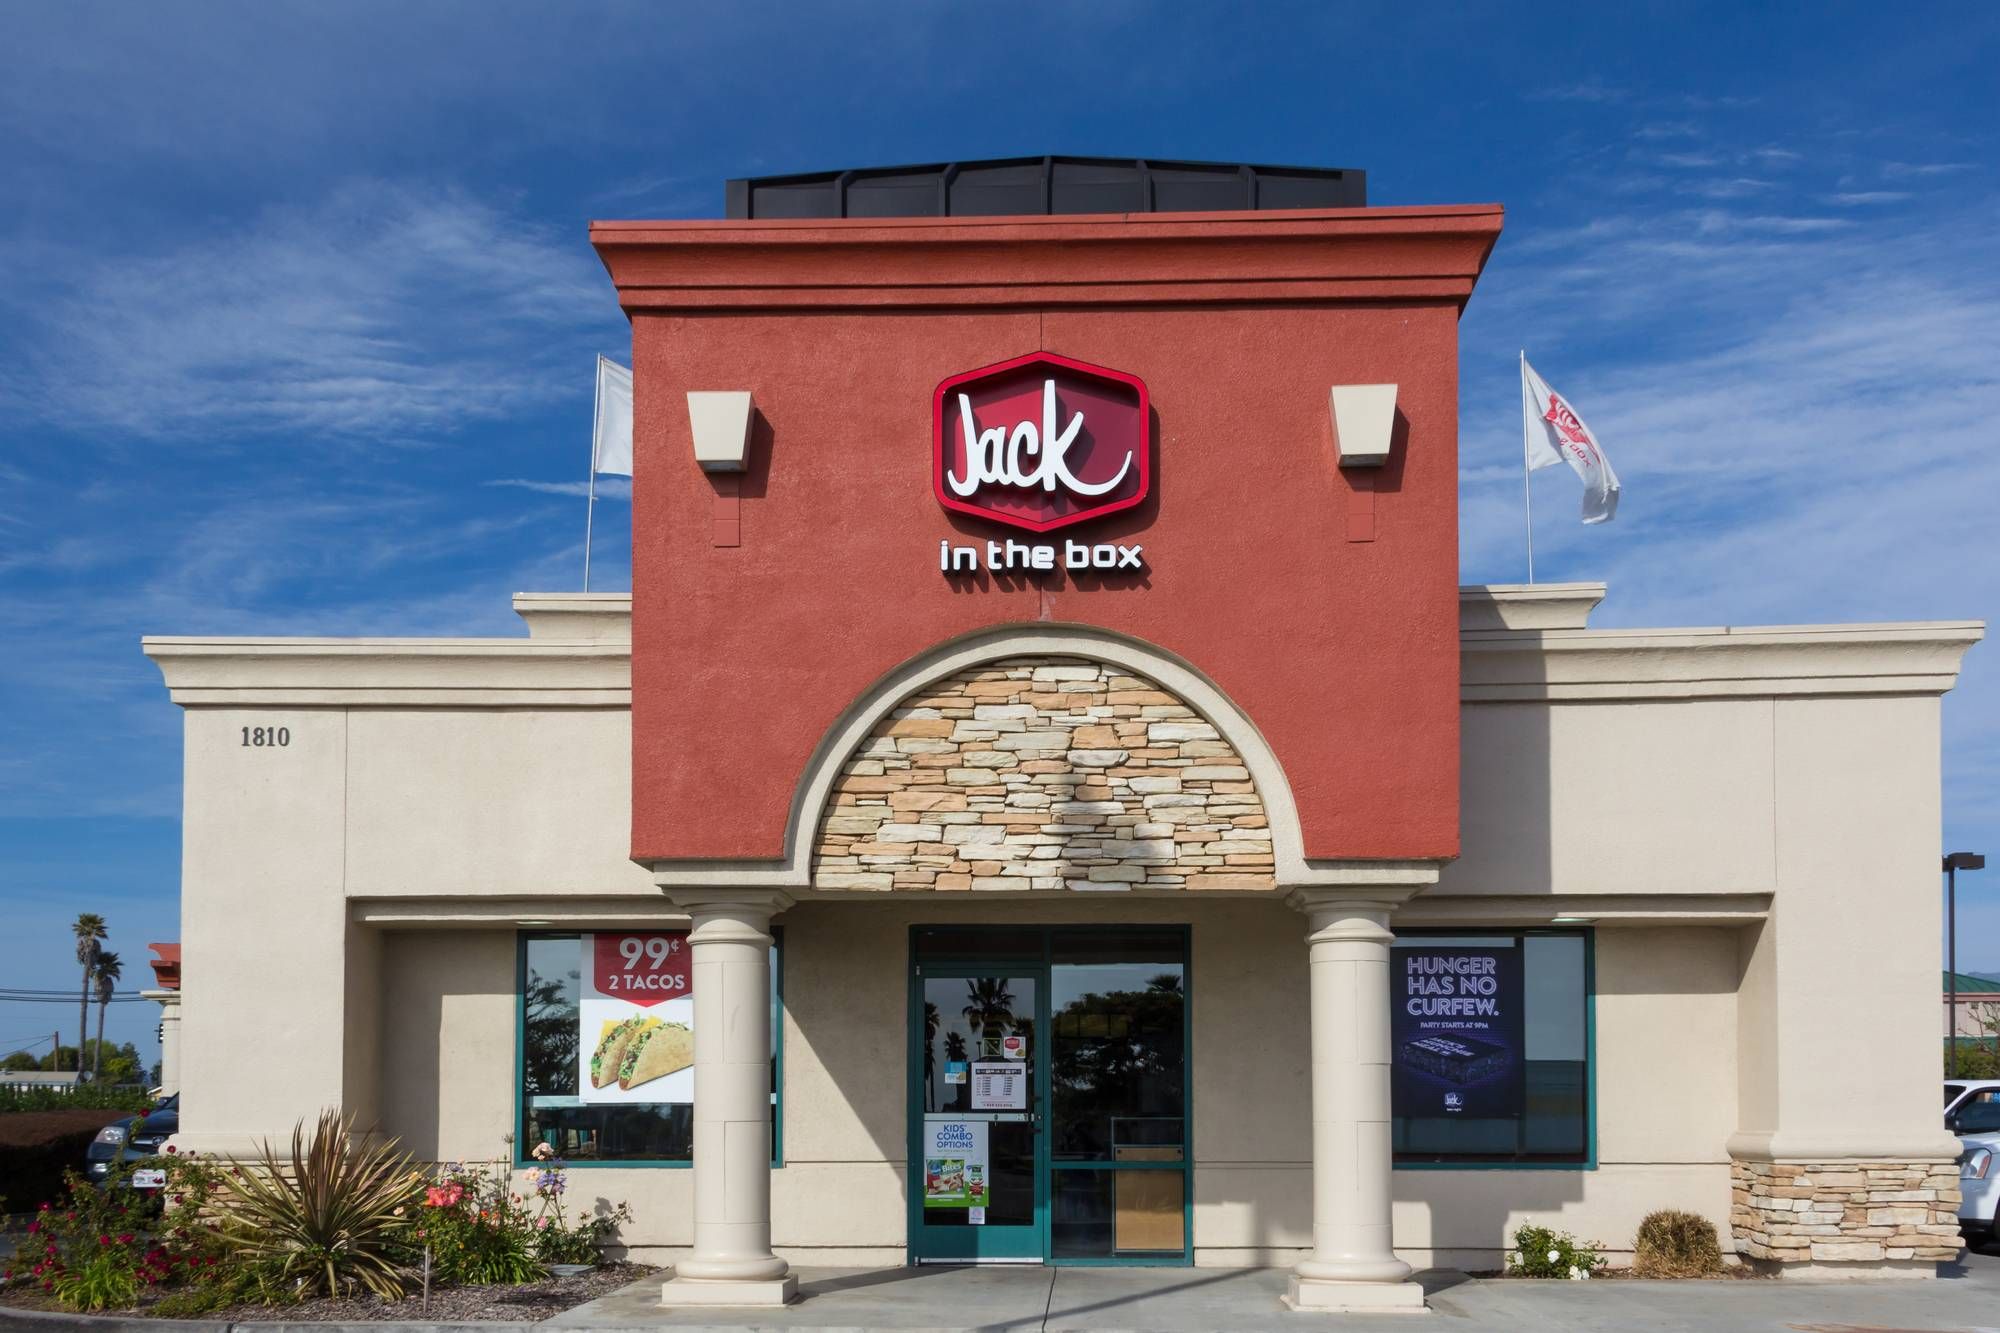 Jack in the Box allegedly discriminates against blind individuals with their Late Night policy.